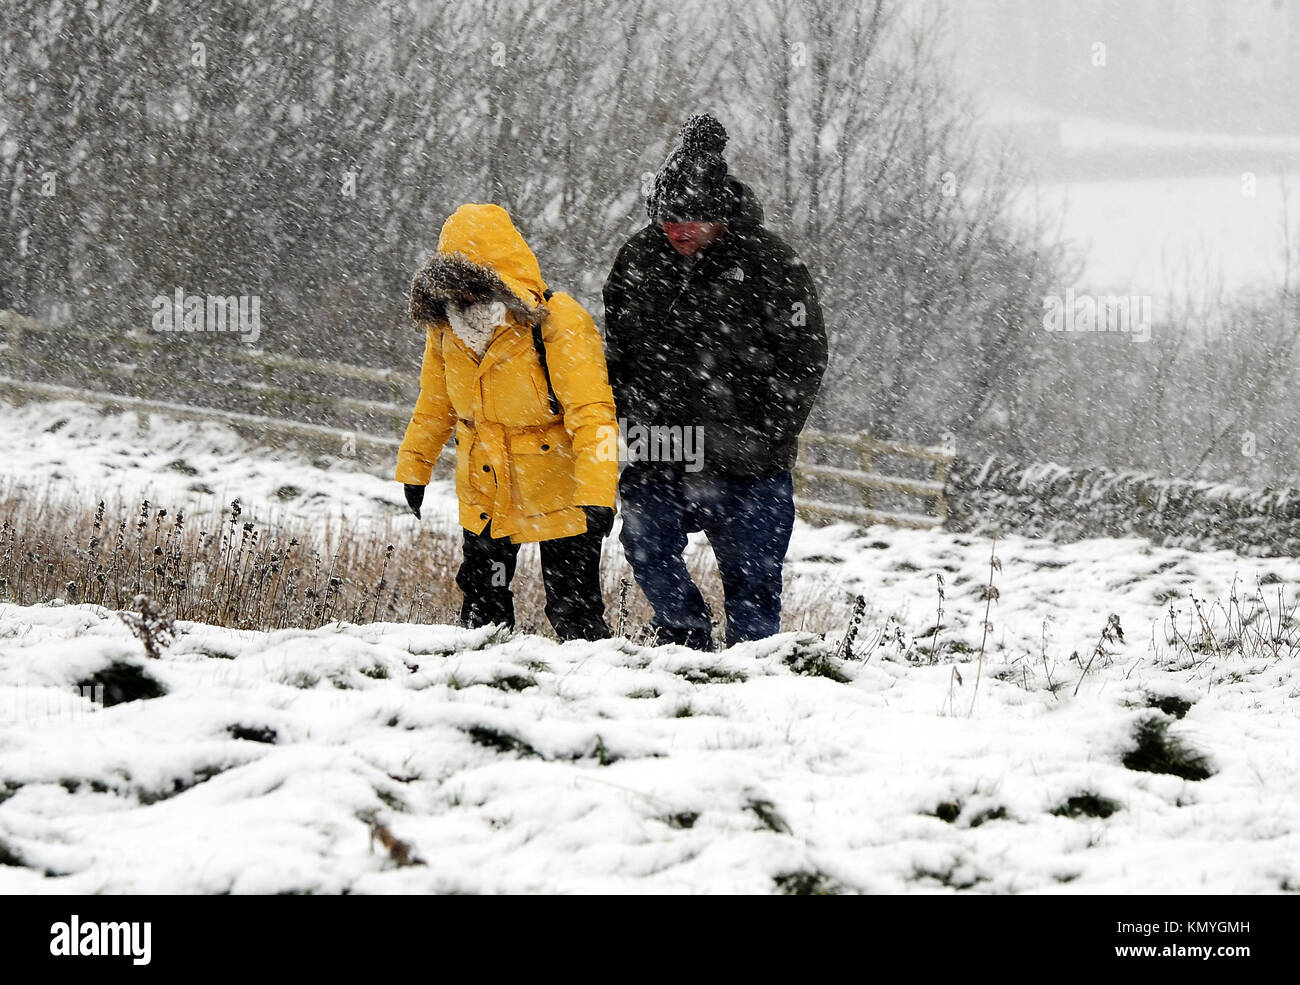 Walkers out in the snow near Castleton in the Peak District, as widespread disruption is expected as snow continues to fall across large parts of the UK, with forecasters warning some communities could be cut off as temperatures plummet. Stock Photo